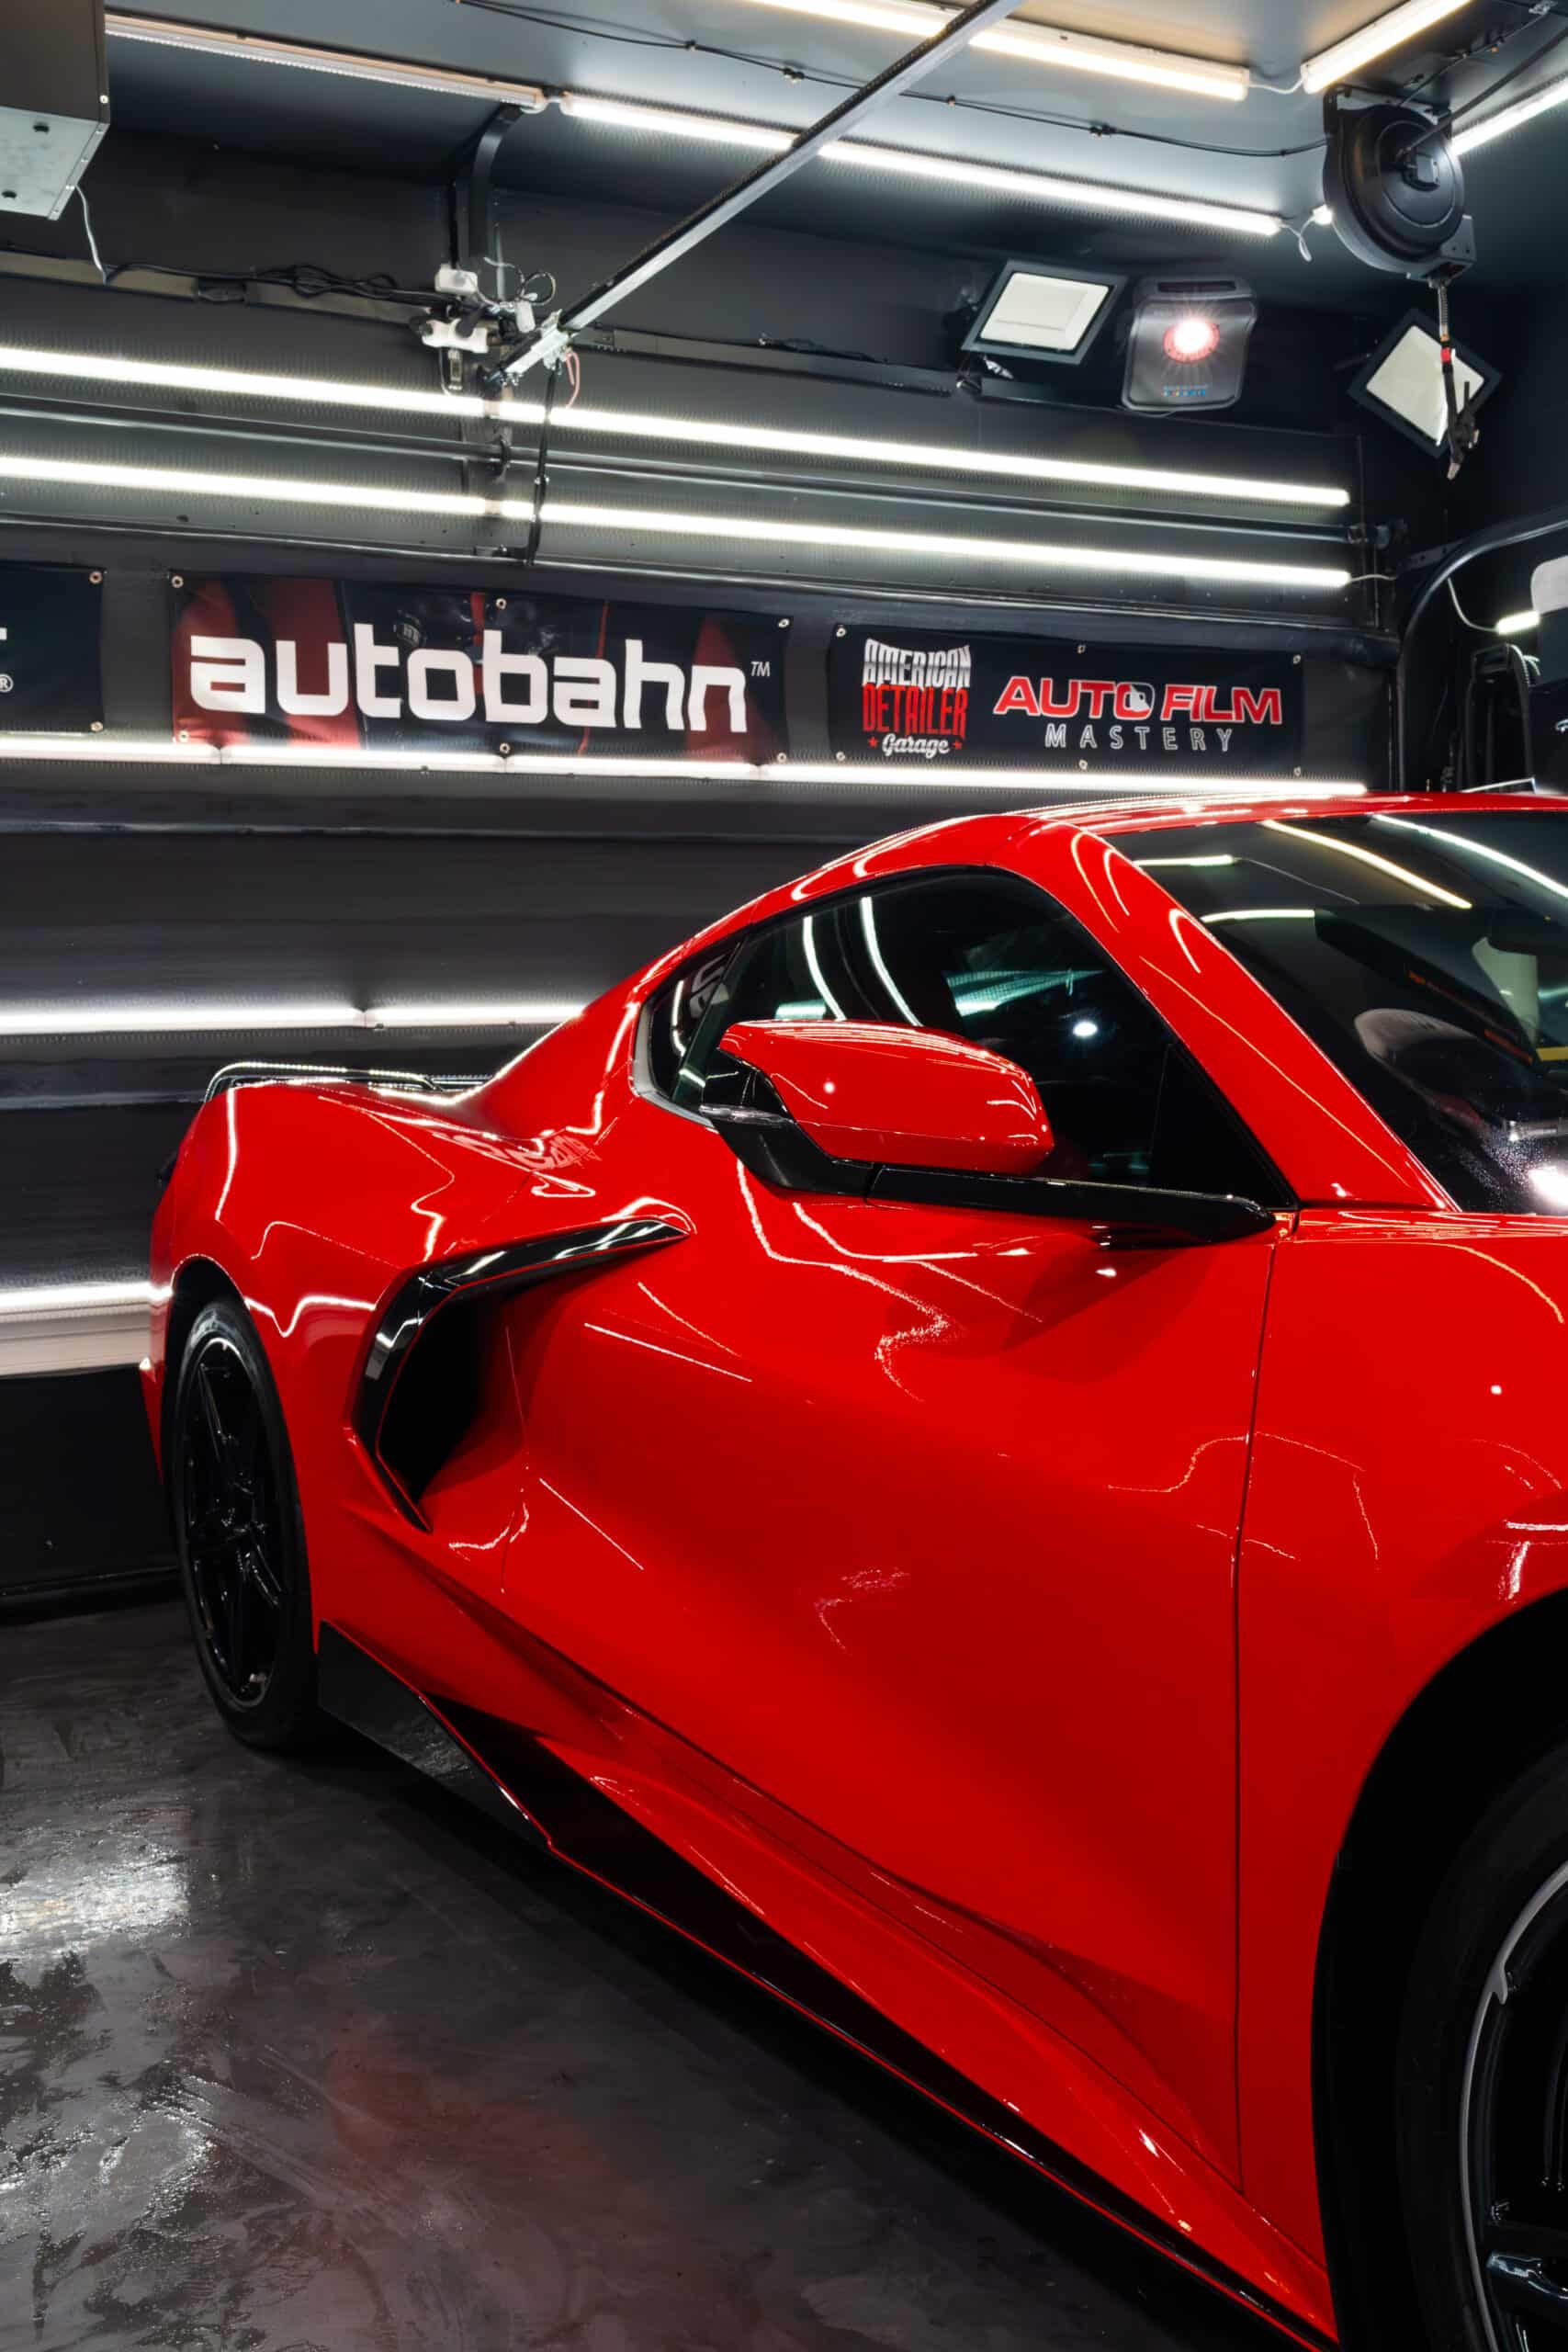 A red sports car is parked in front of a sign that says autobahn